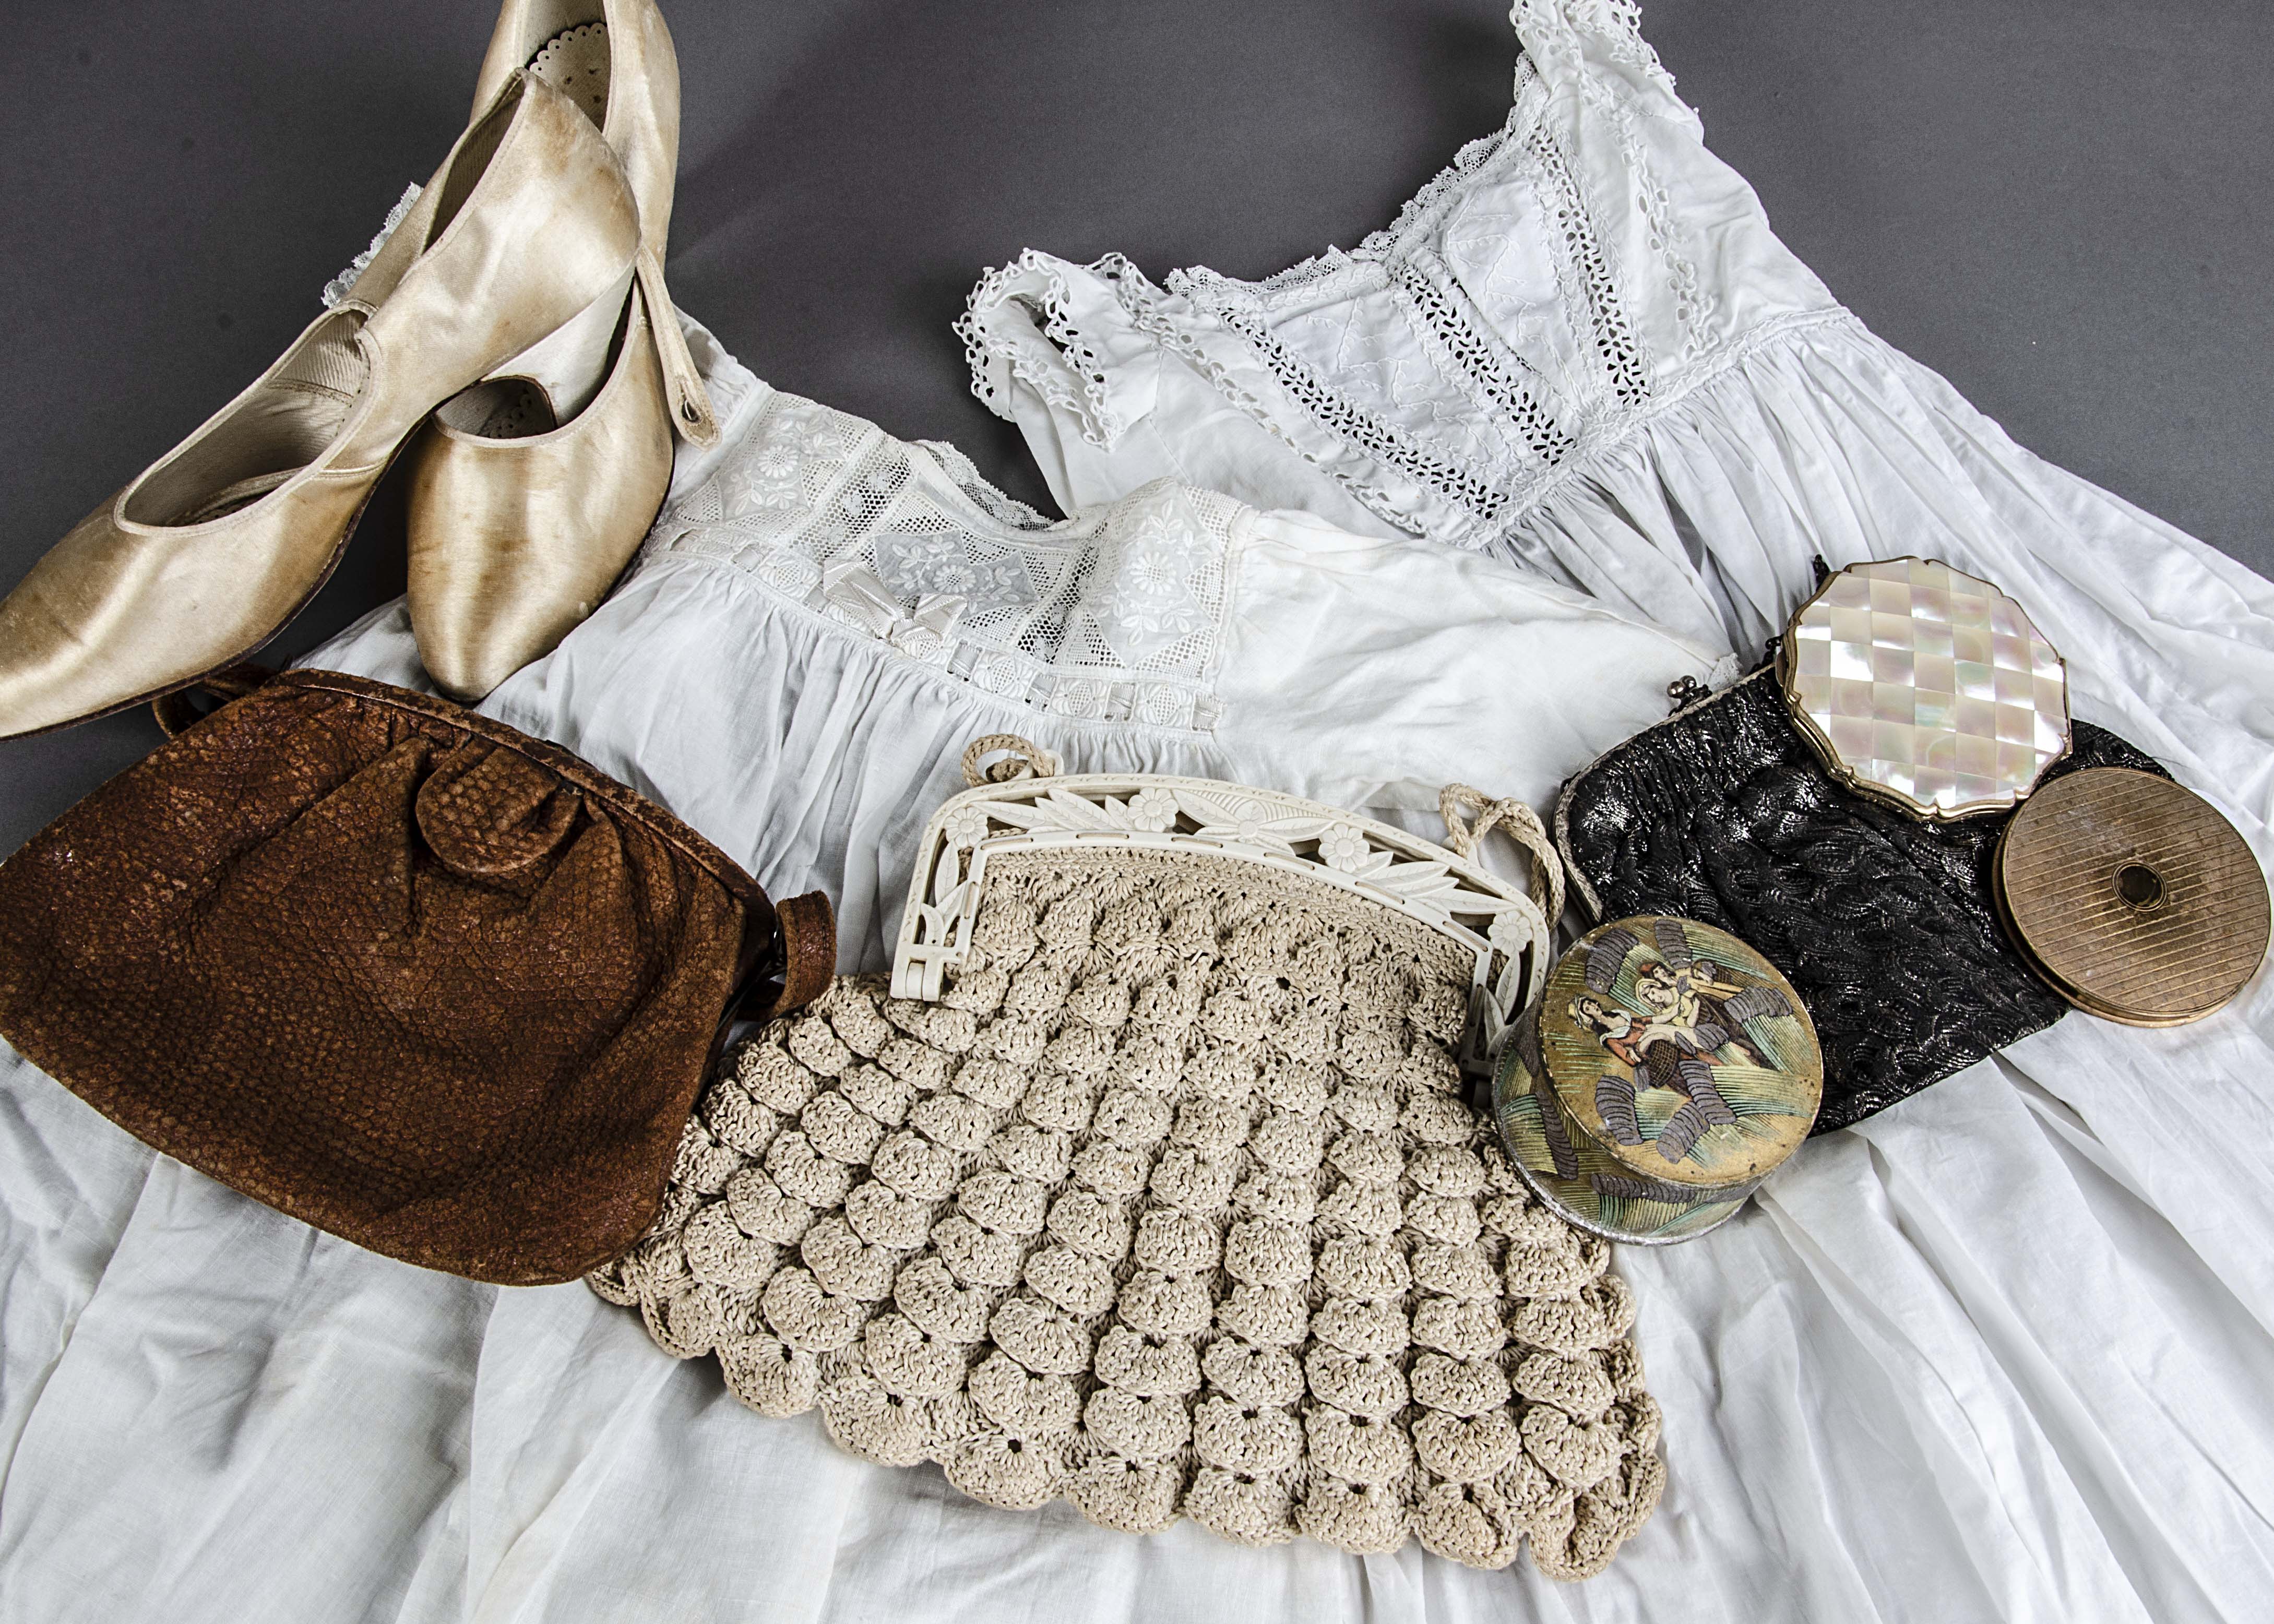 A small collection of 20th century clothes, including three mid 20th century skirts and a polka